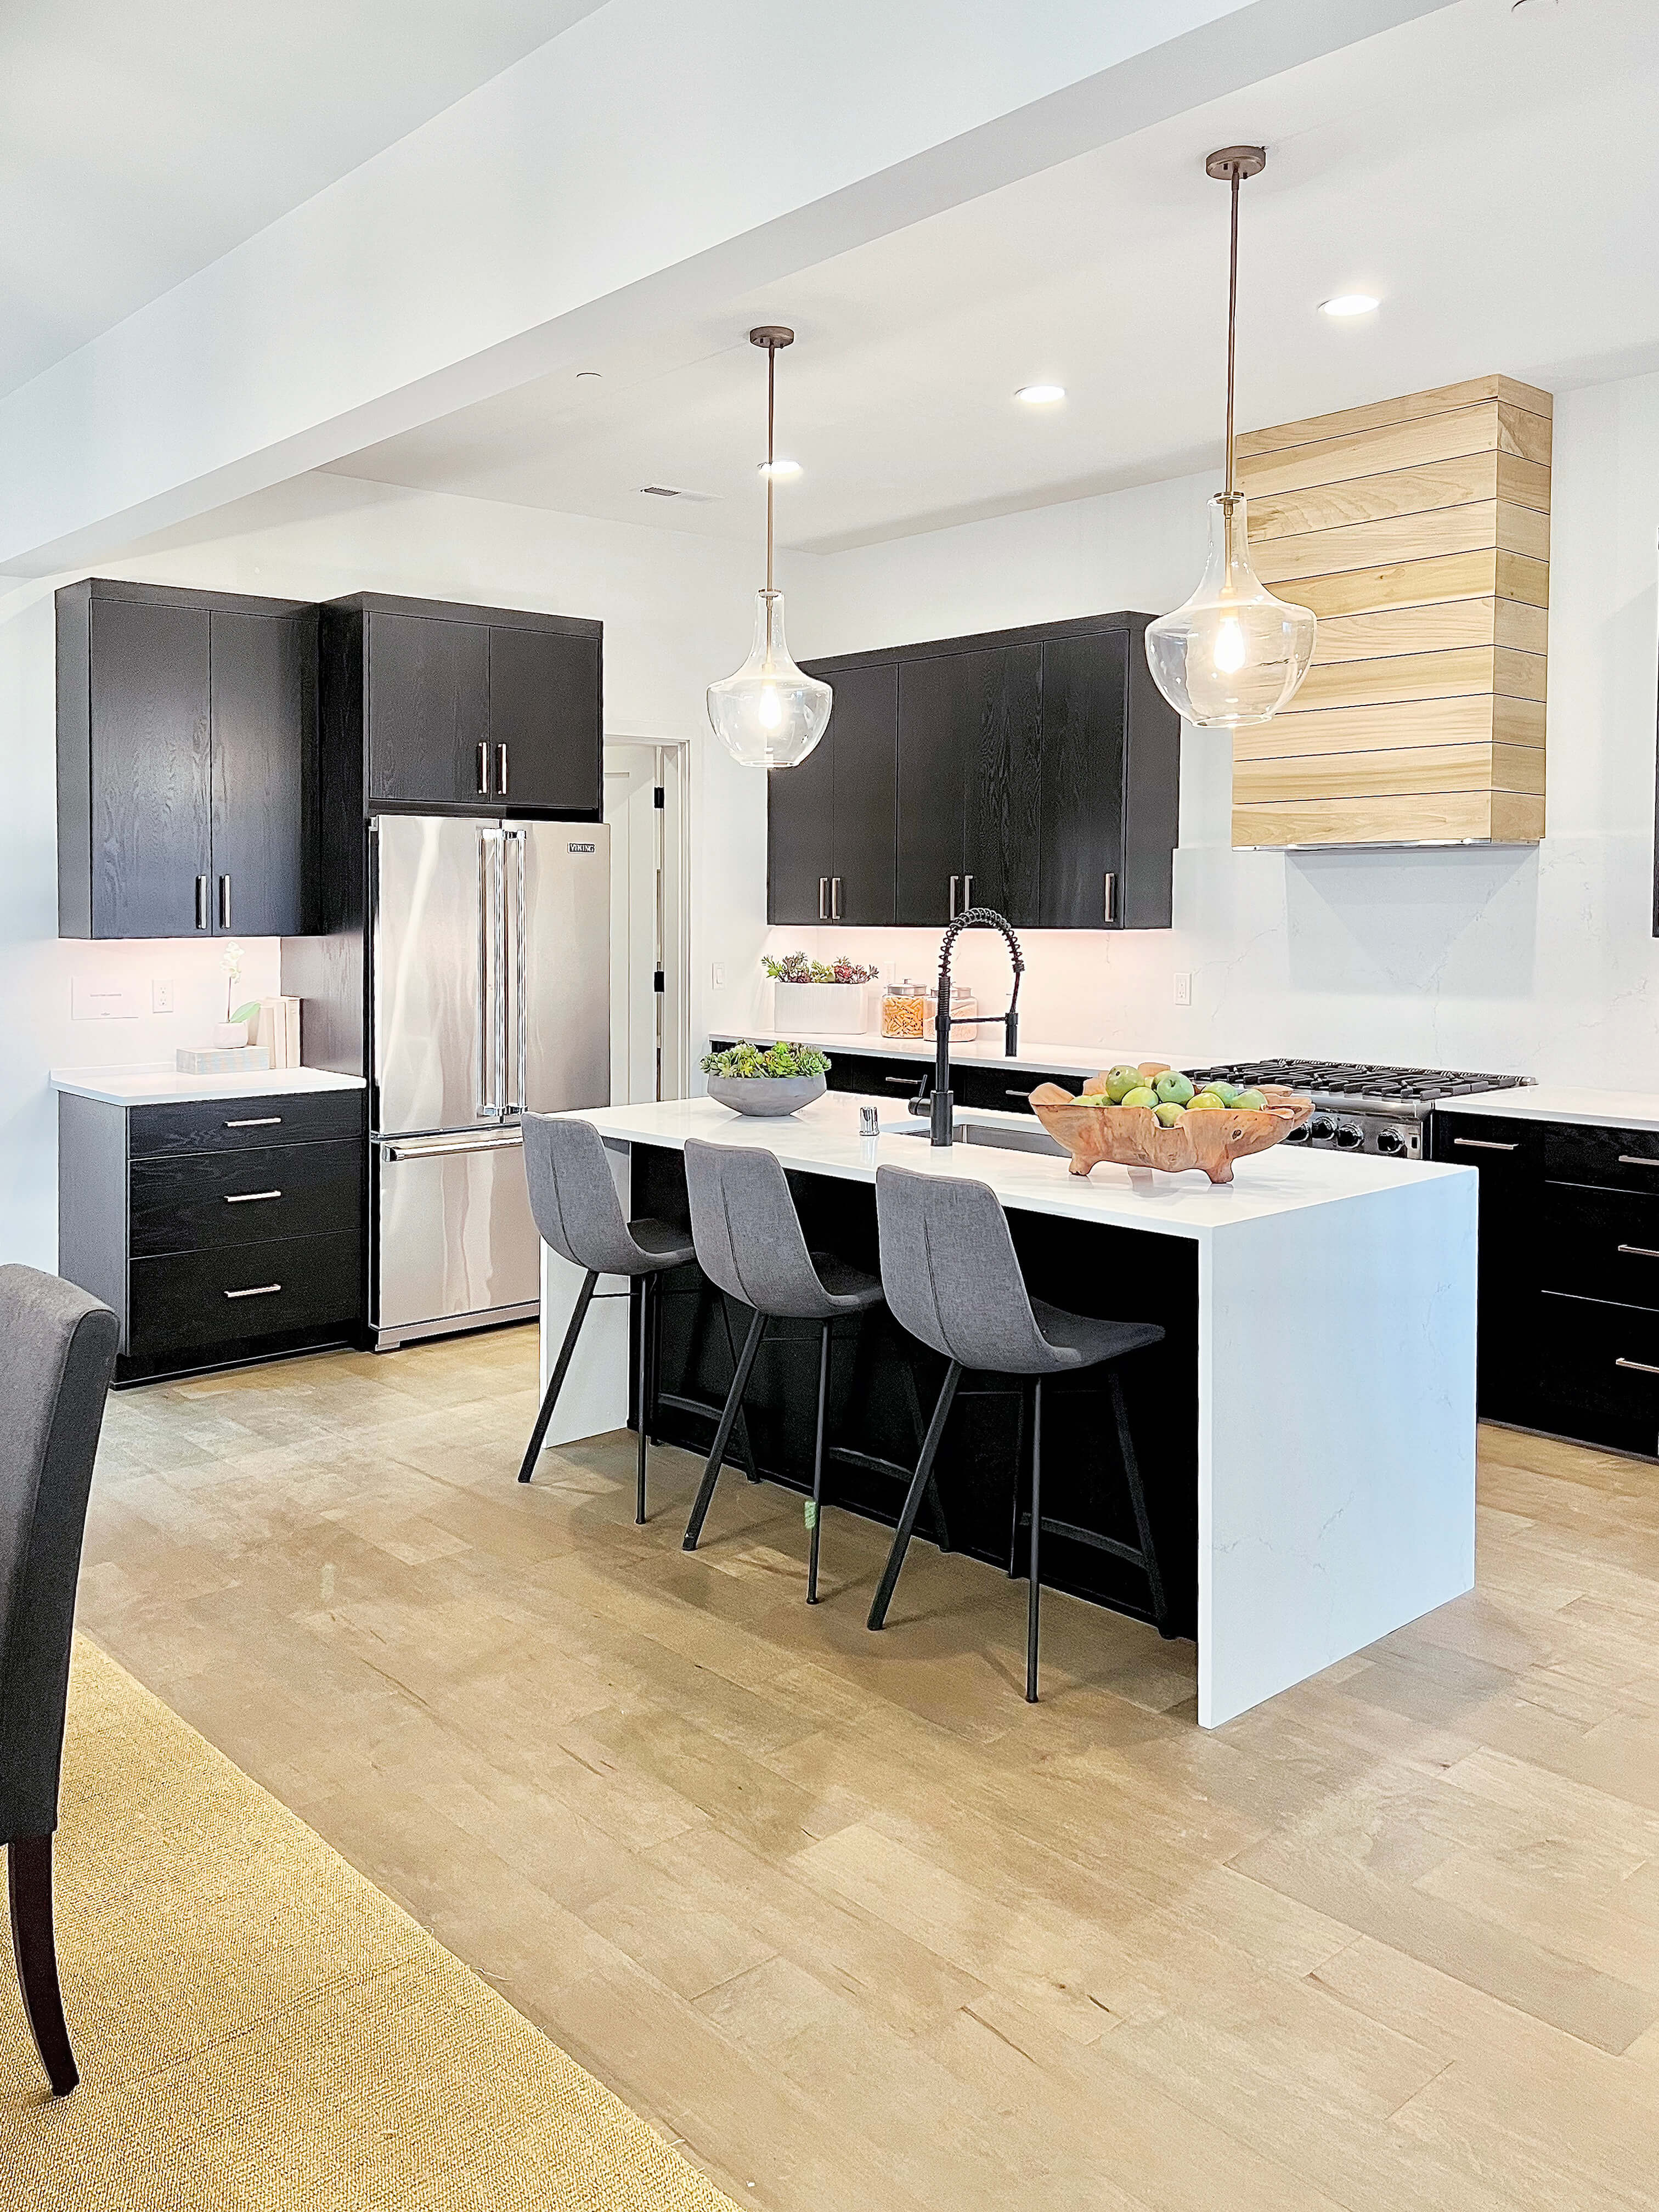 A contemporary kitchen design with textured, black painted oak cabinets and a light stained wood hood with shiplap details all from Dura Supreme.